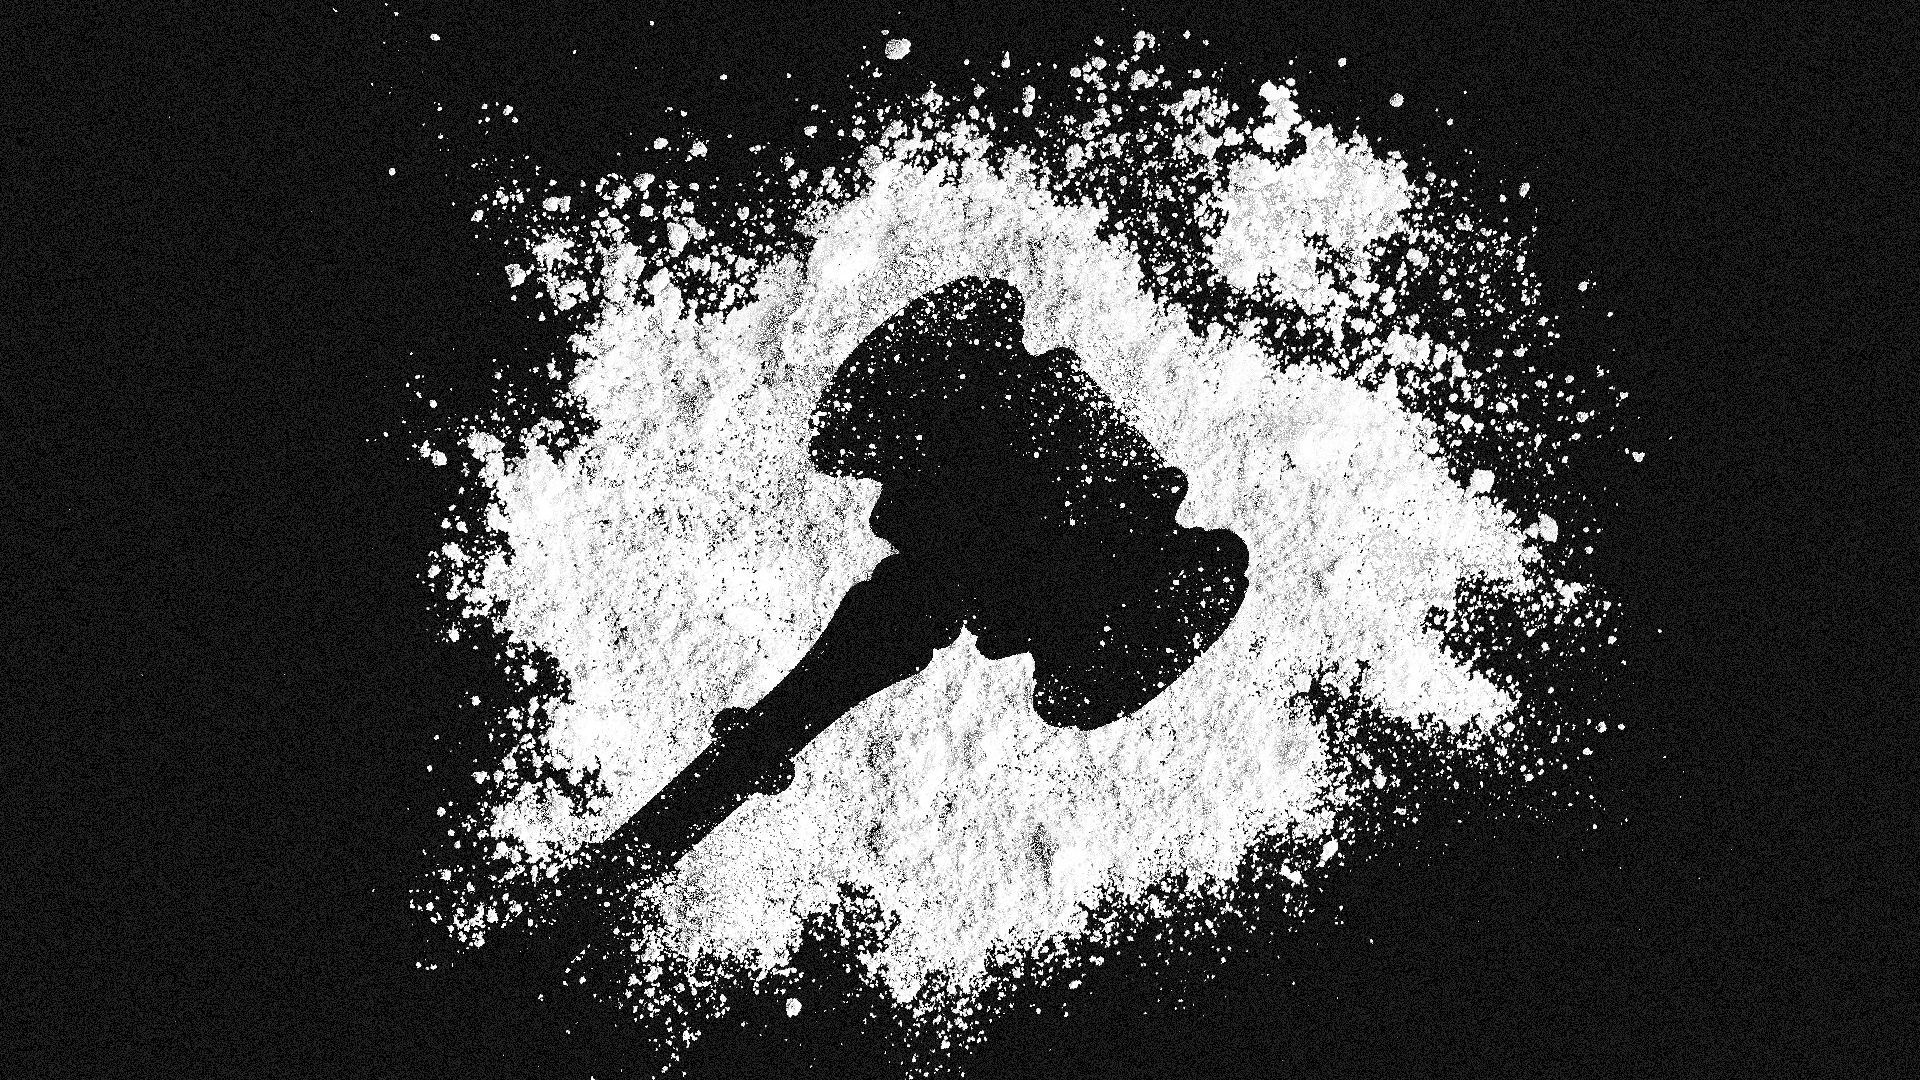 Illustration of a pile of white powder with the negative space shaped like a gavel.